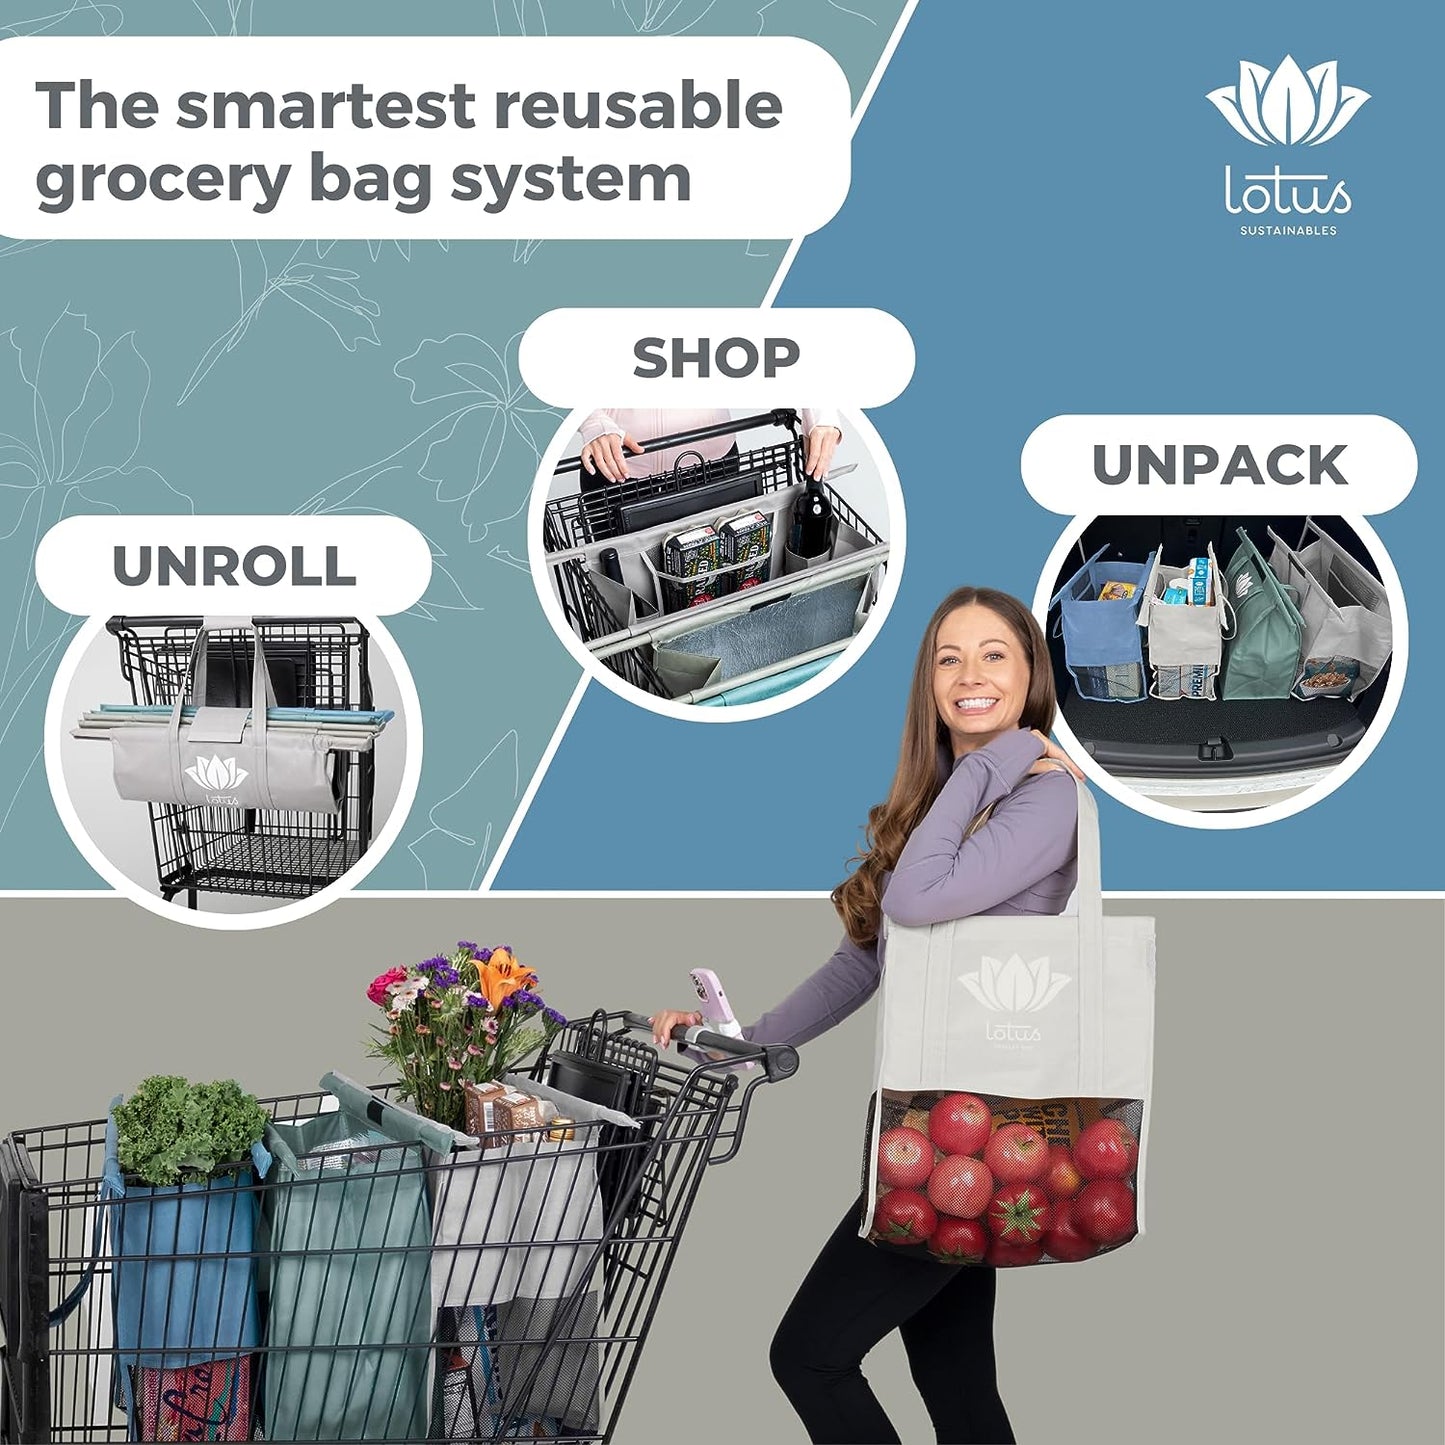 Grocery Store Reusable Easy Cart and Pack Set of 4 -W/Lrg COOLER Bag & Egg/Wine Holder! Reusable Grocery Cart Bags Sized for USA. Washable Eco-Friendly 4-Bag Grocery Tote. (Earth Tones)